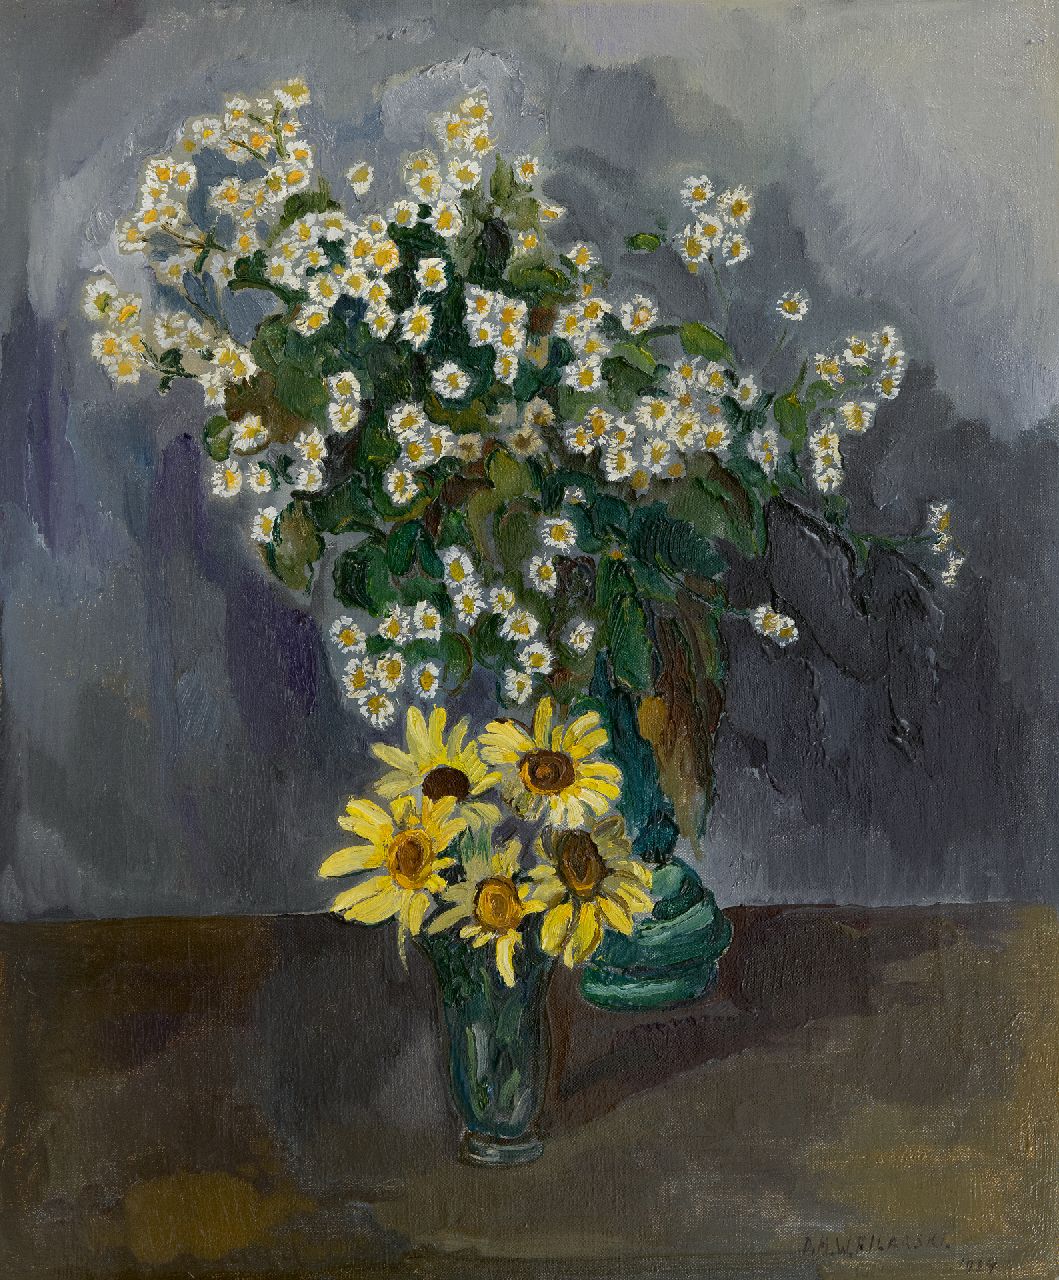 Filarski D.H.W.  | 'Dirk' Herman Willem Filarski | Paintings offered for sale | Still life with daisies and sunflowers, oil on canvas 60.2 x 50.3 cm, signed l.r. and dated 1934